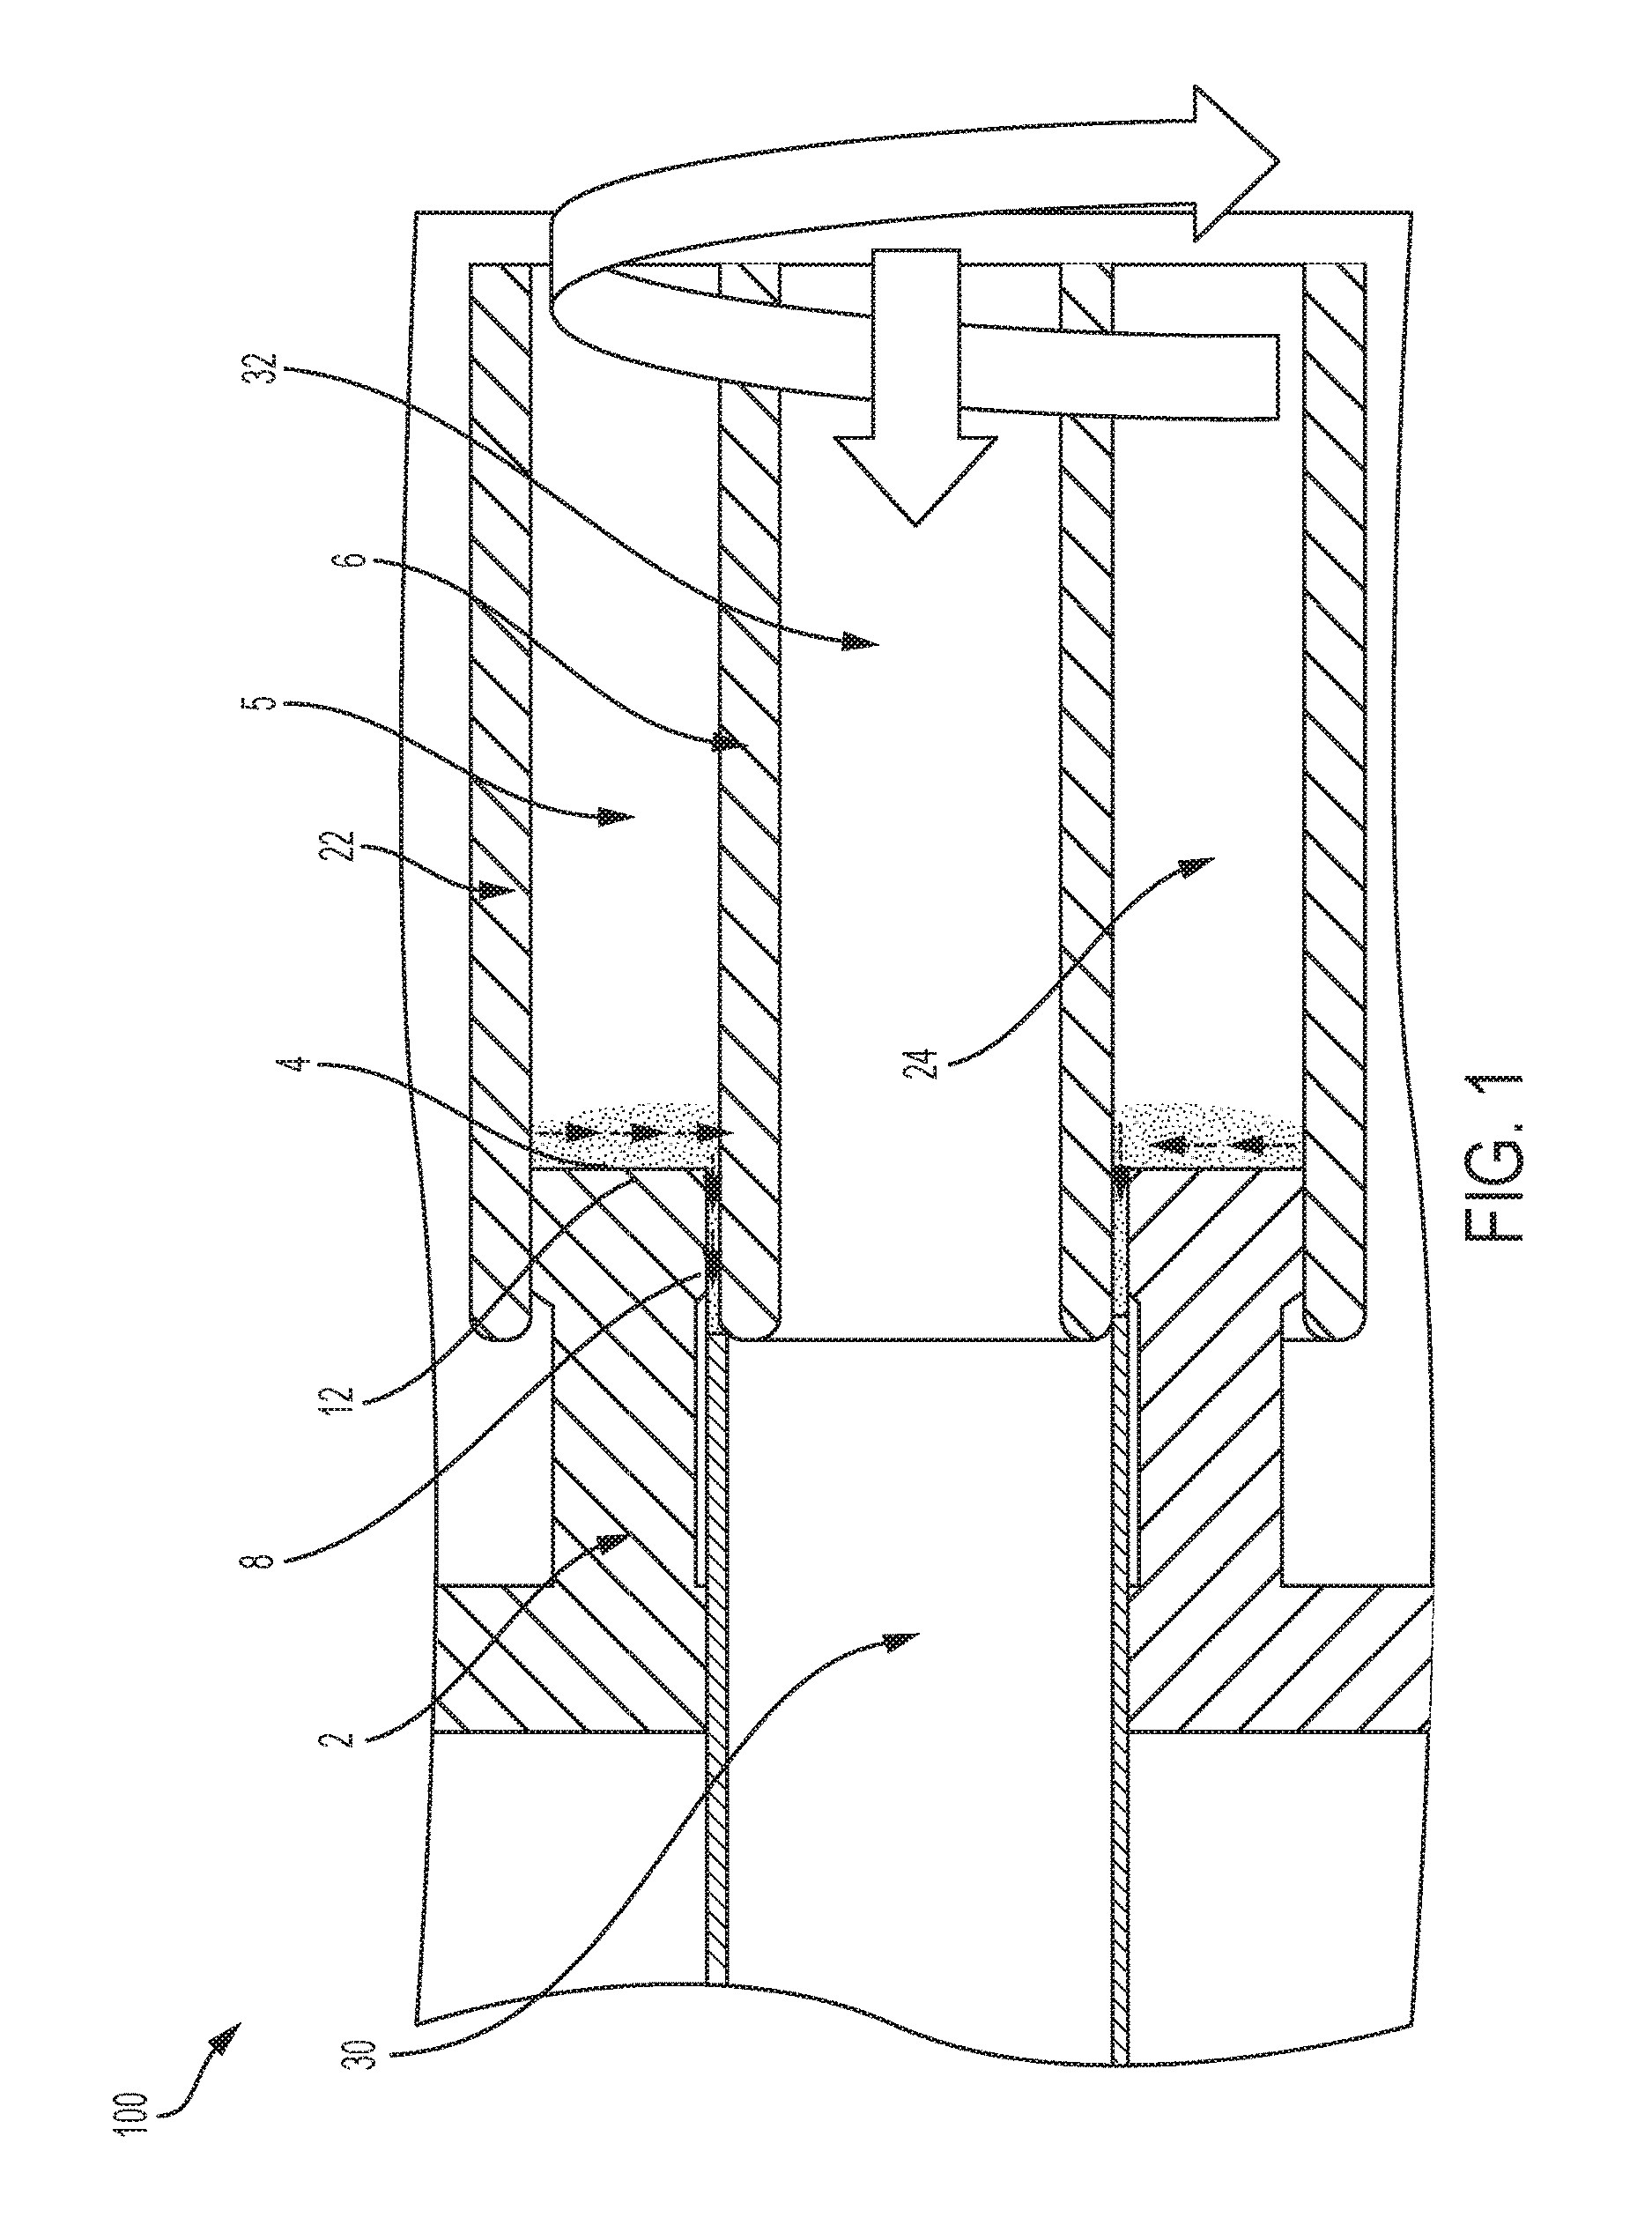 System and process for formation of extrusion products